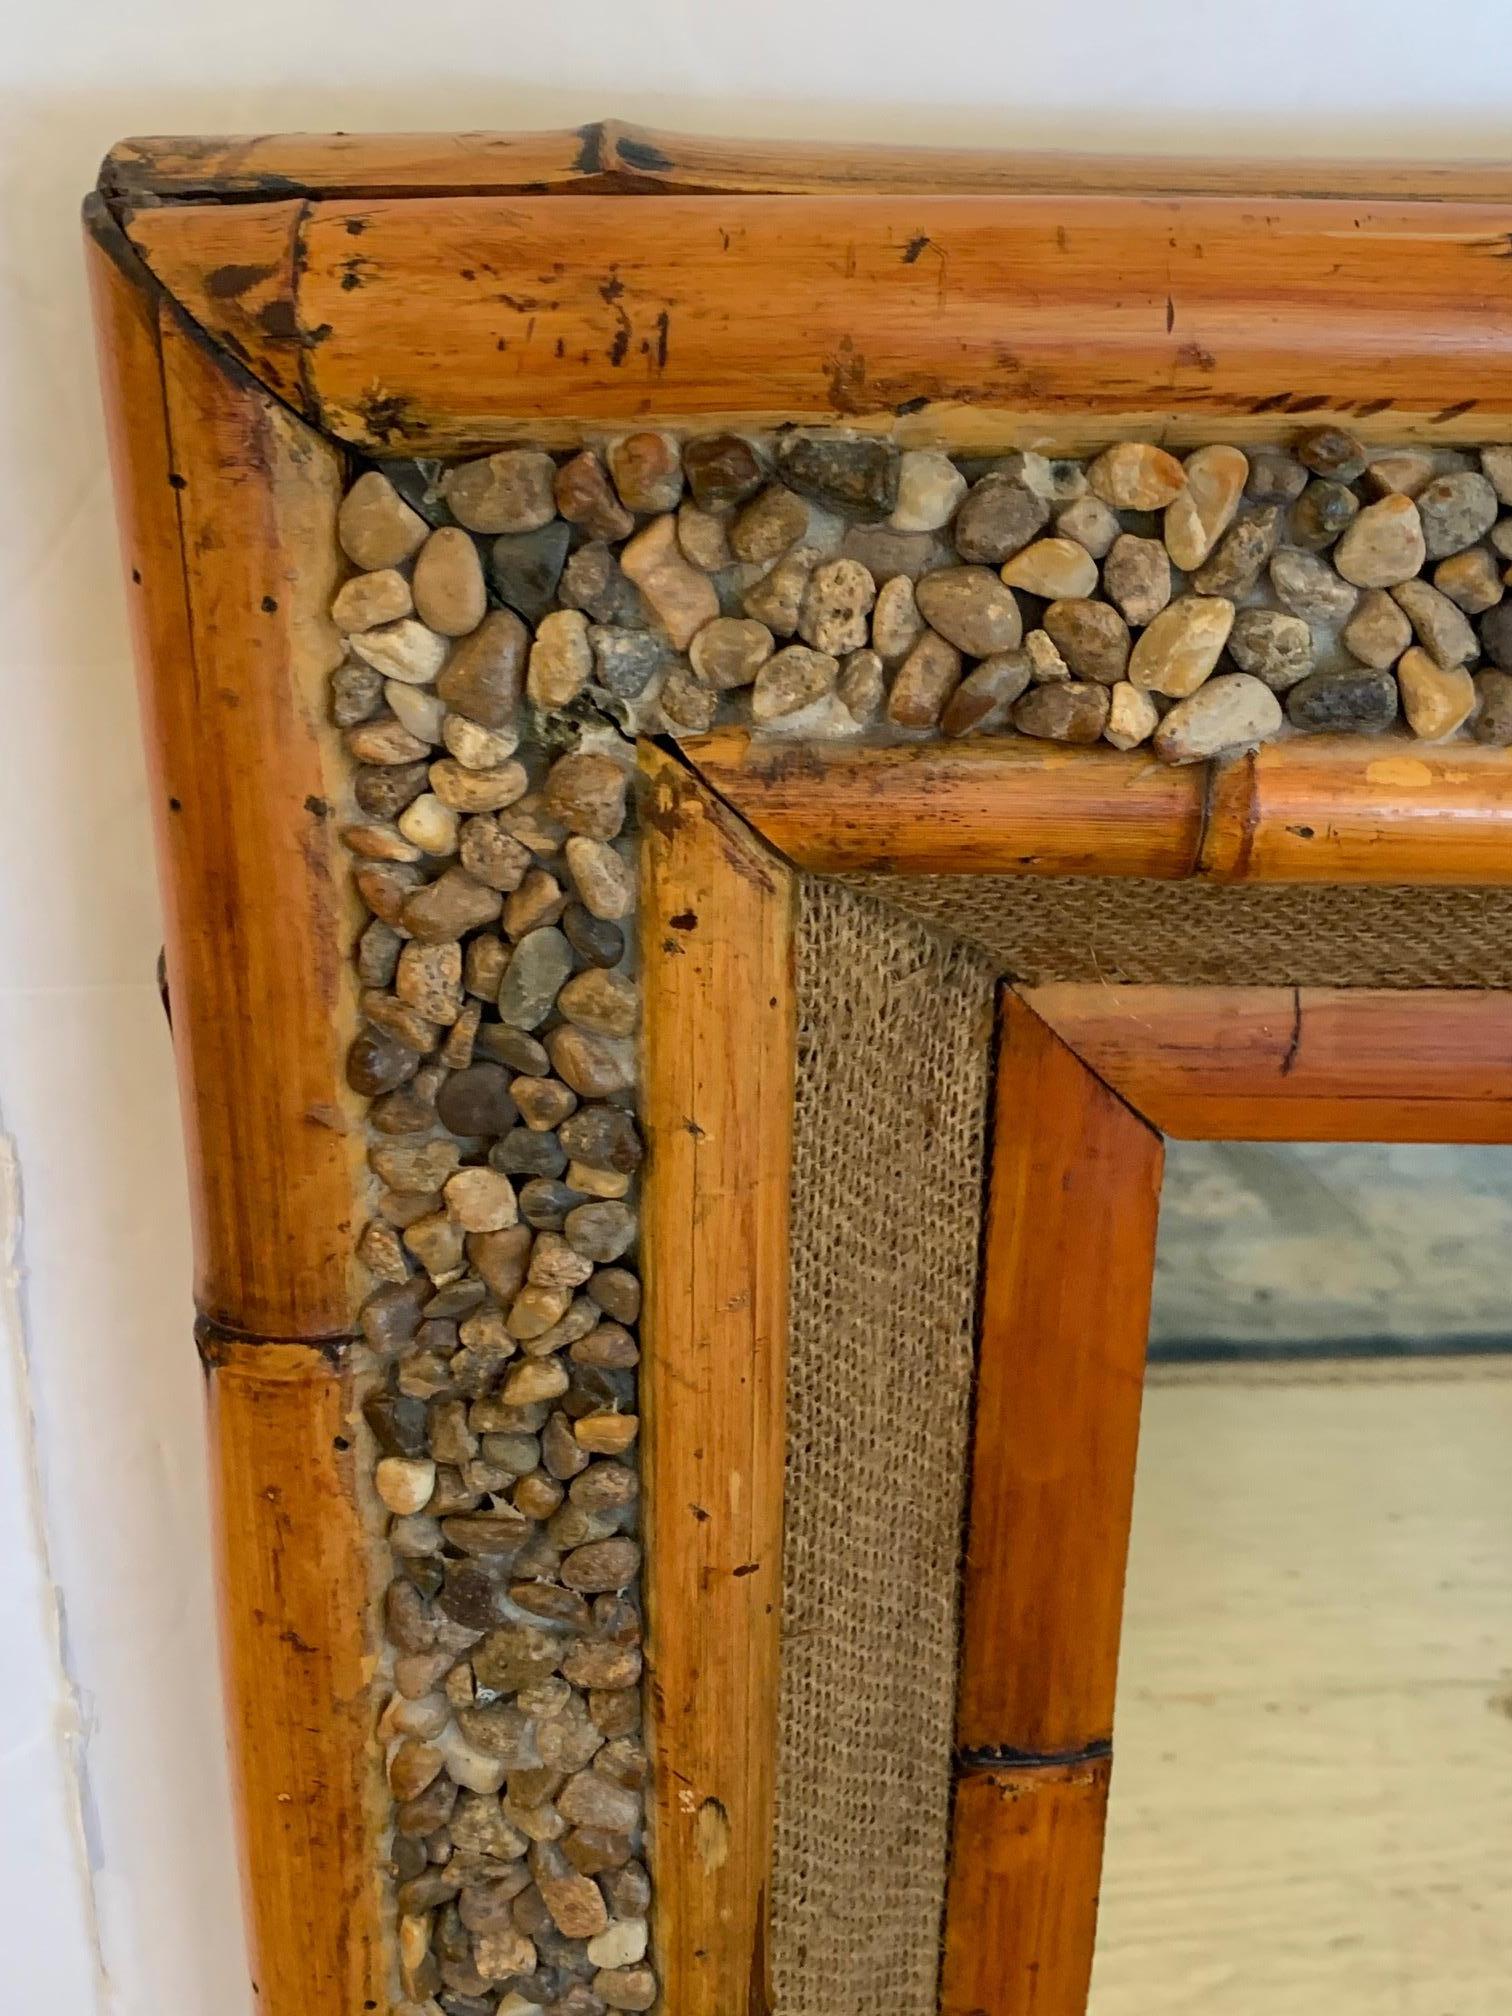 Super cool organic mix of real bamboo, natural pebbles and burlap framed mirror.
Mirror is 18 W x 24 H.